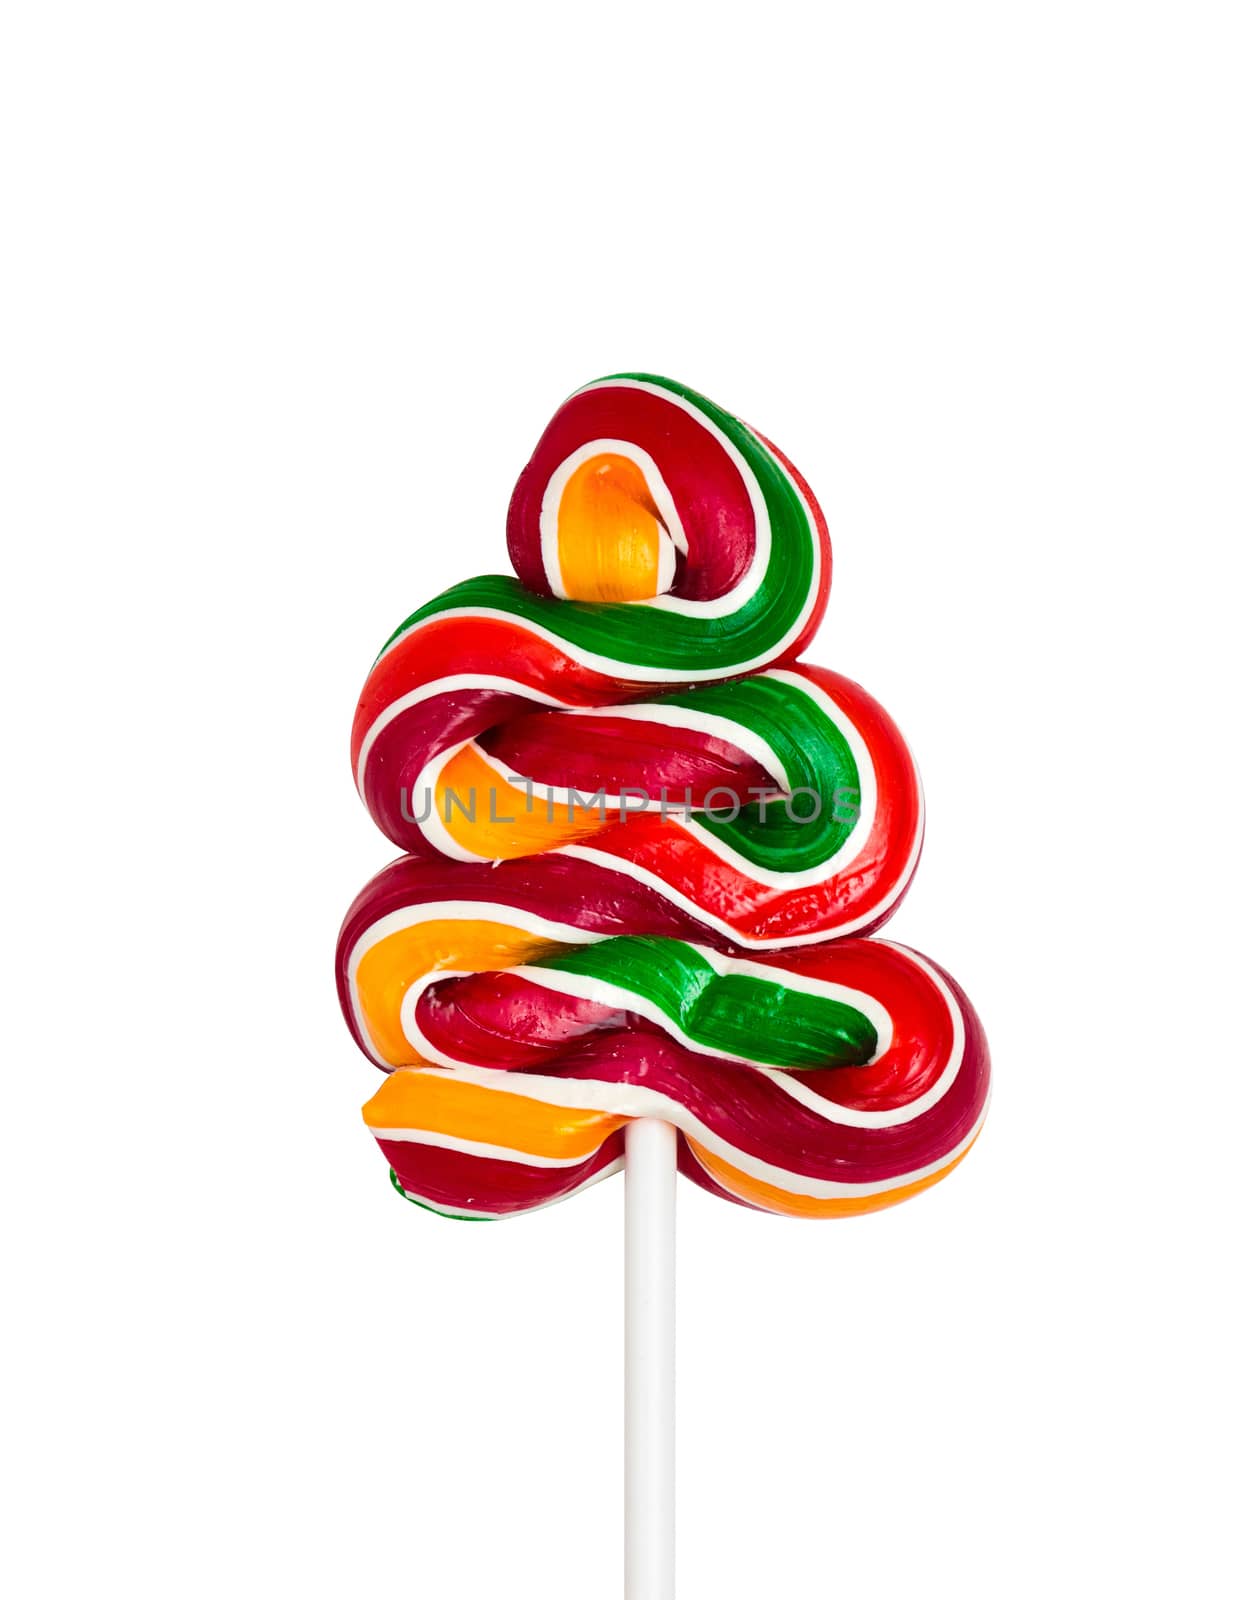 Colorful spiral lollipop lolly pop on a white background